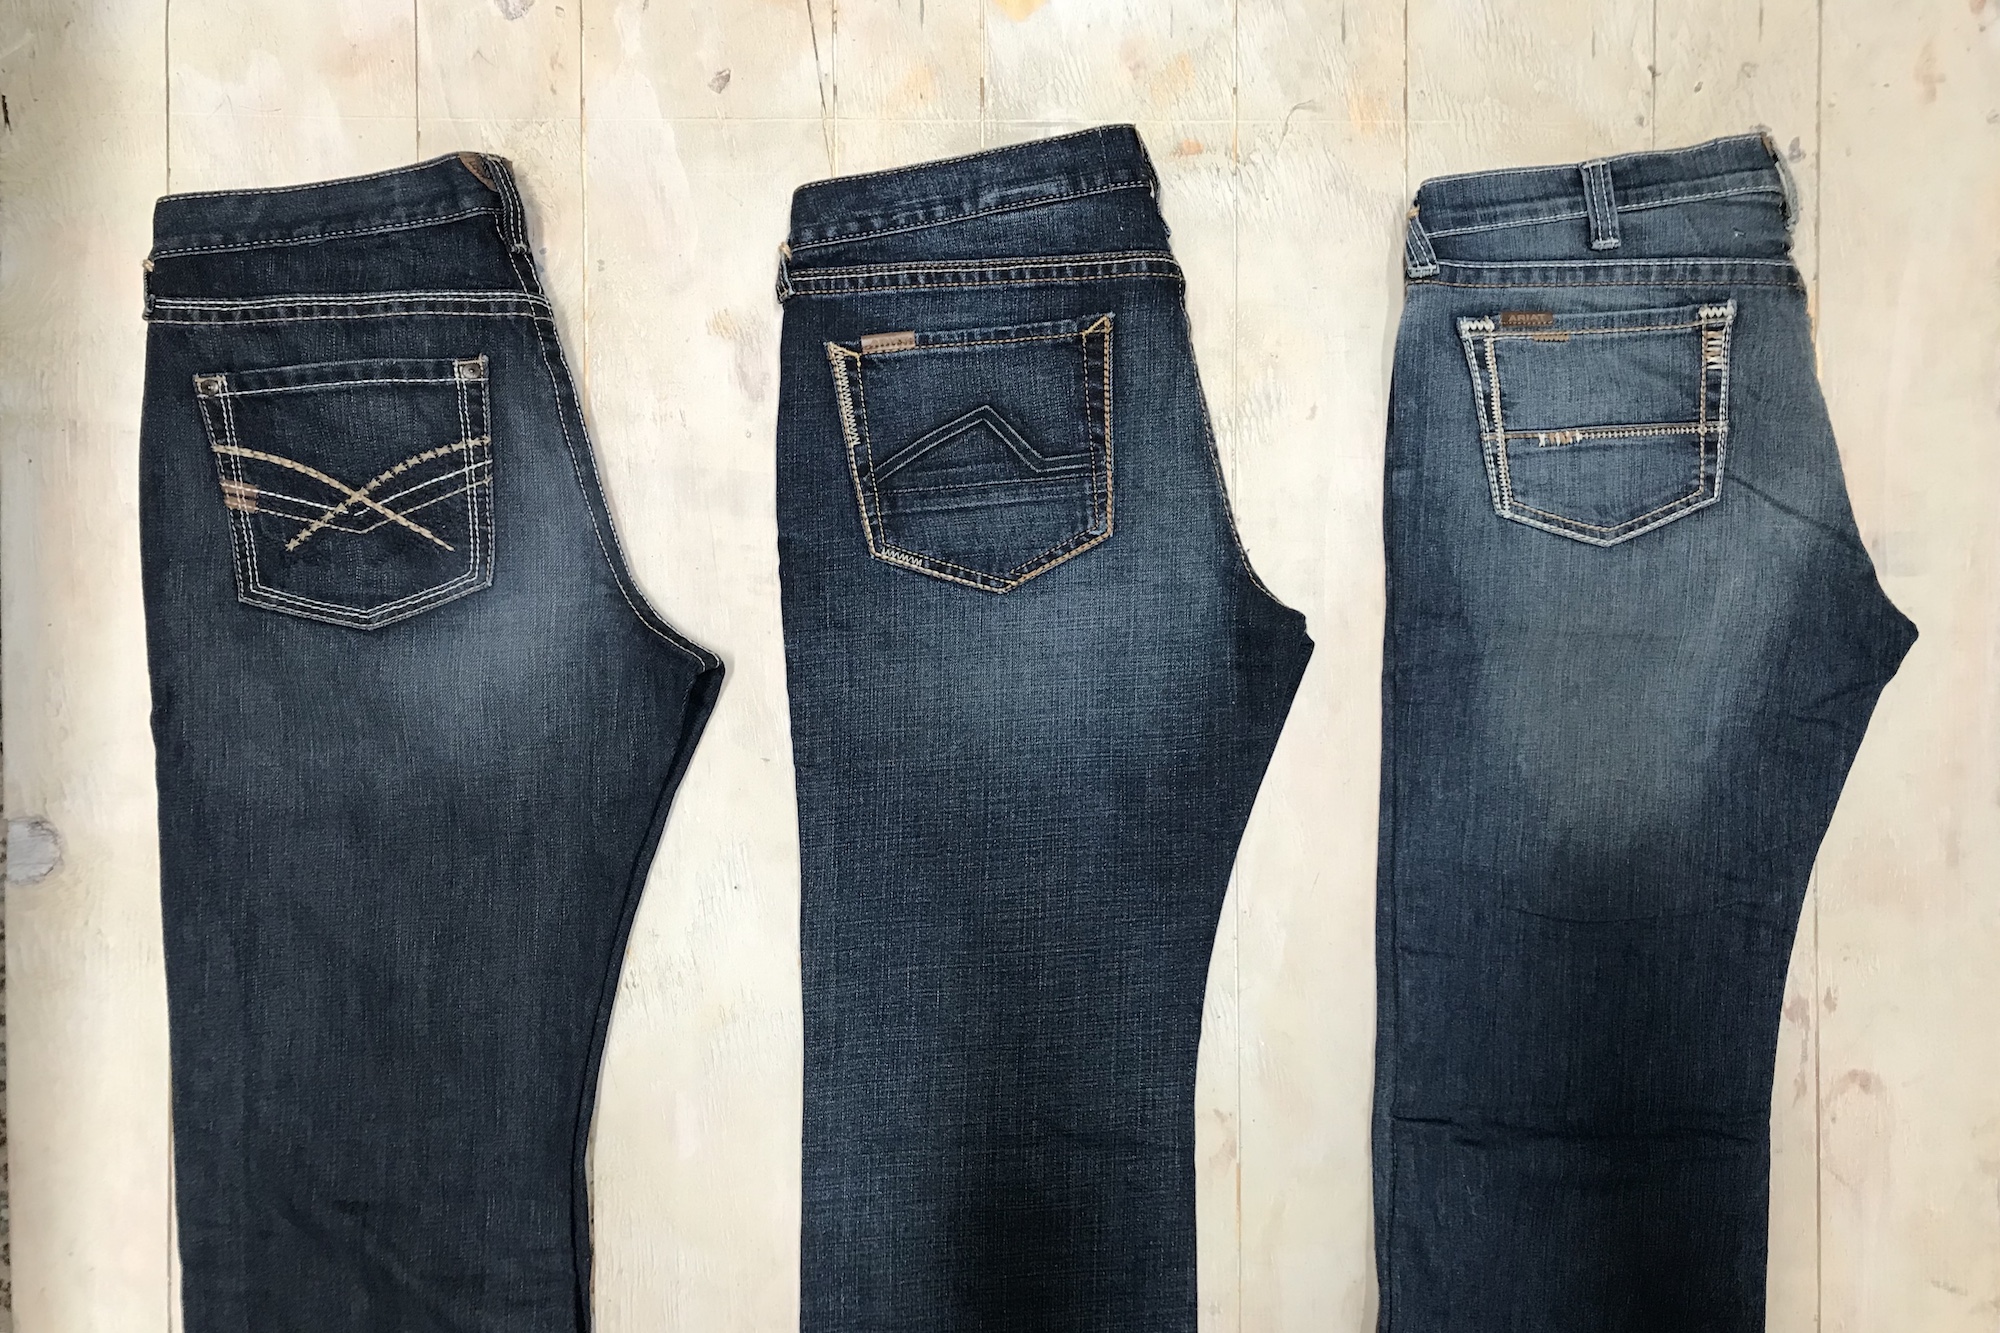 Guide to Jeans Style, Cut, and Fit - Stages West